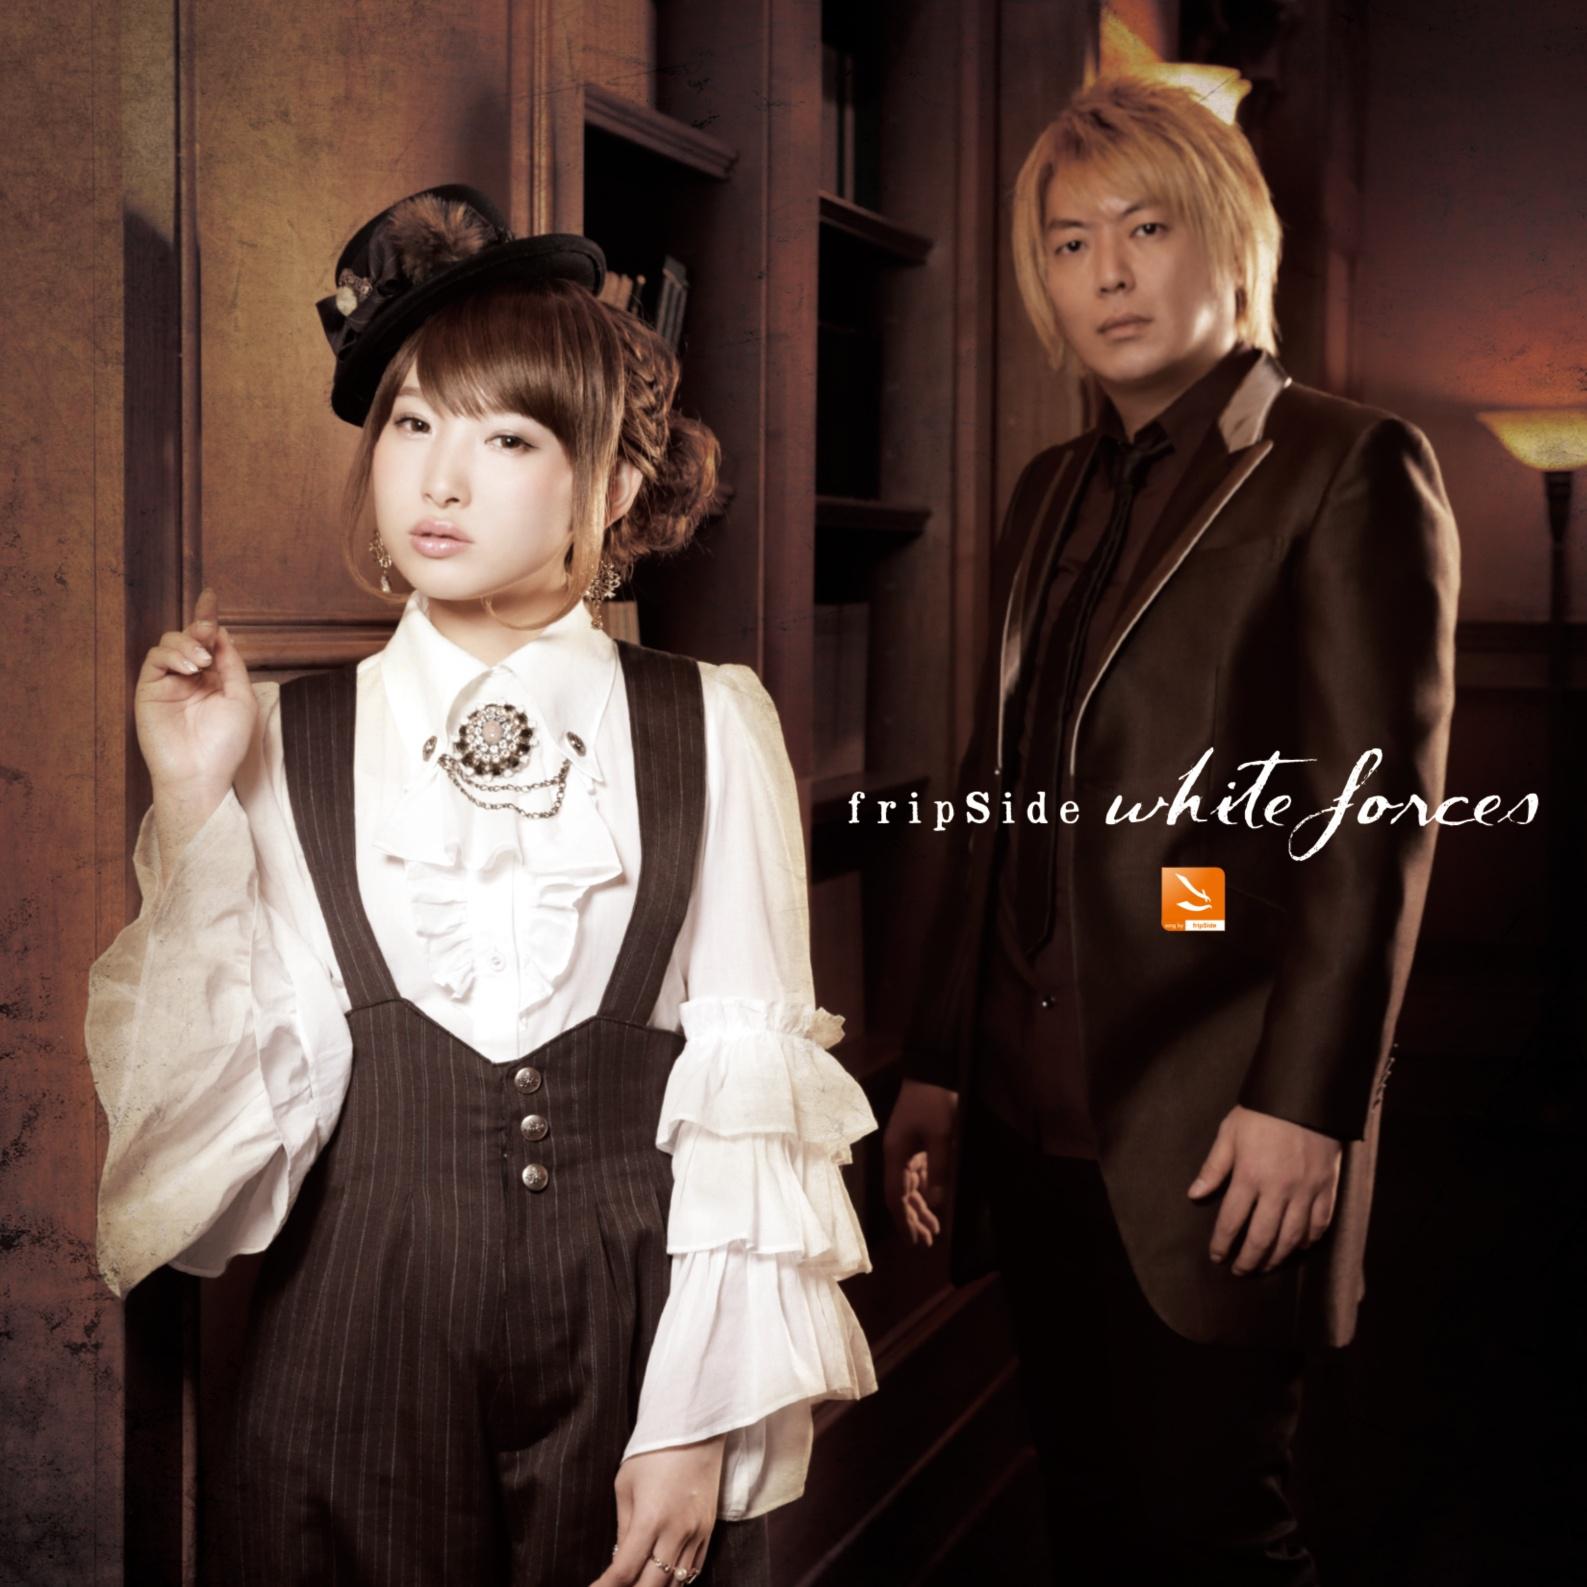 white forces歌词 歌手fripSide-专辑white forces-单曲《white forces》LRC歌词下载